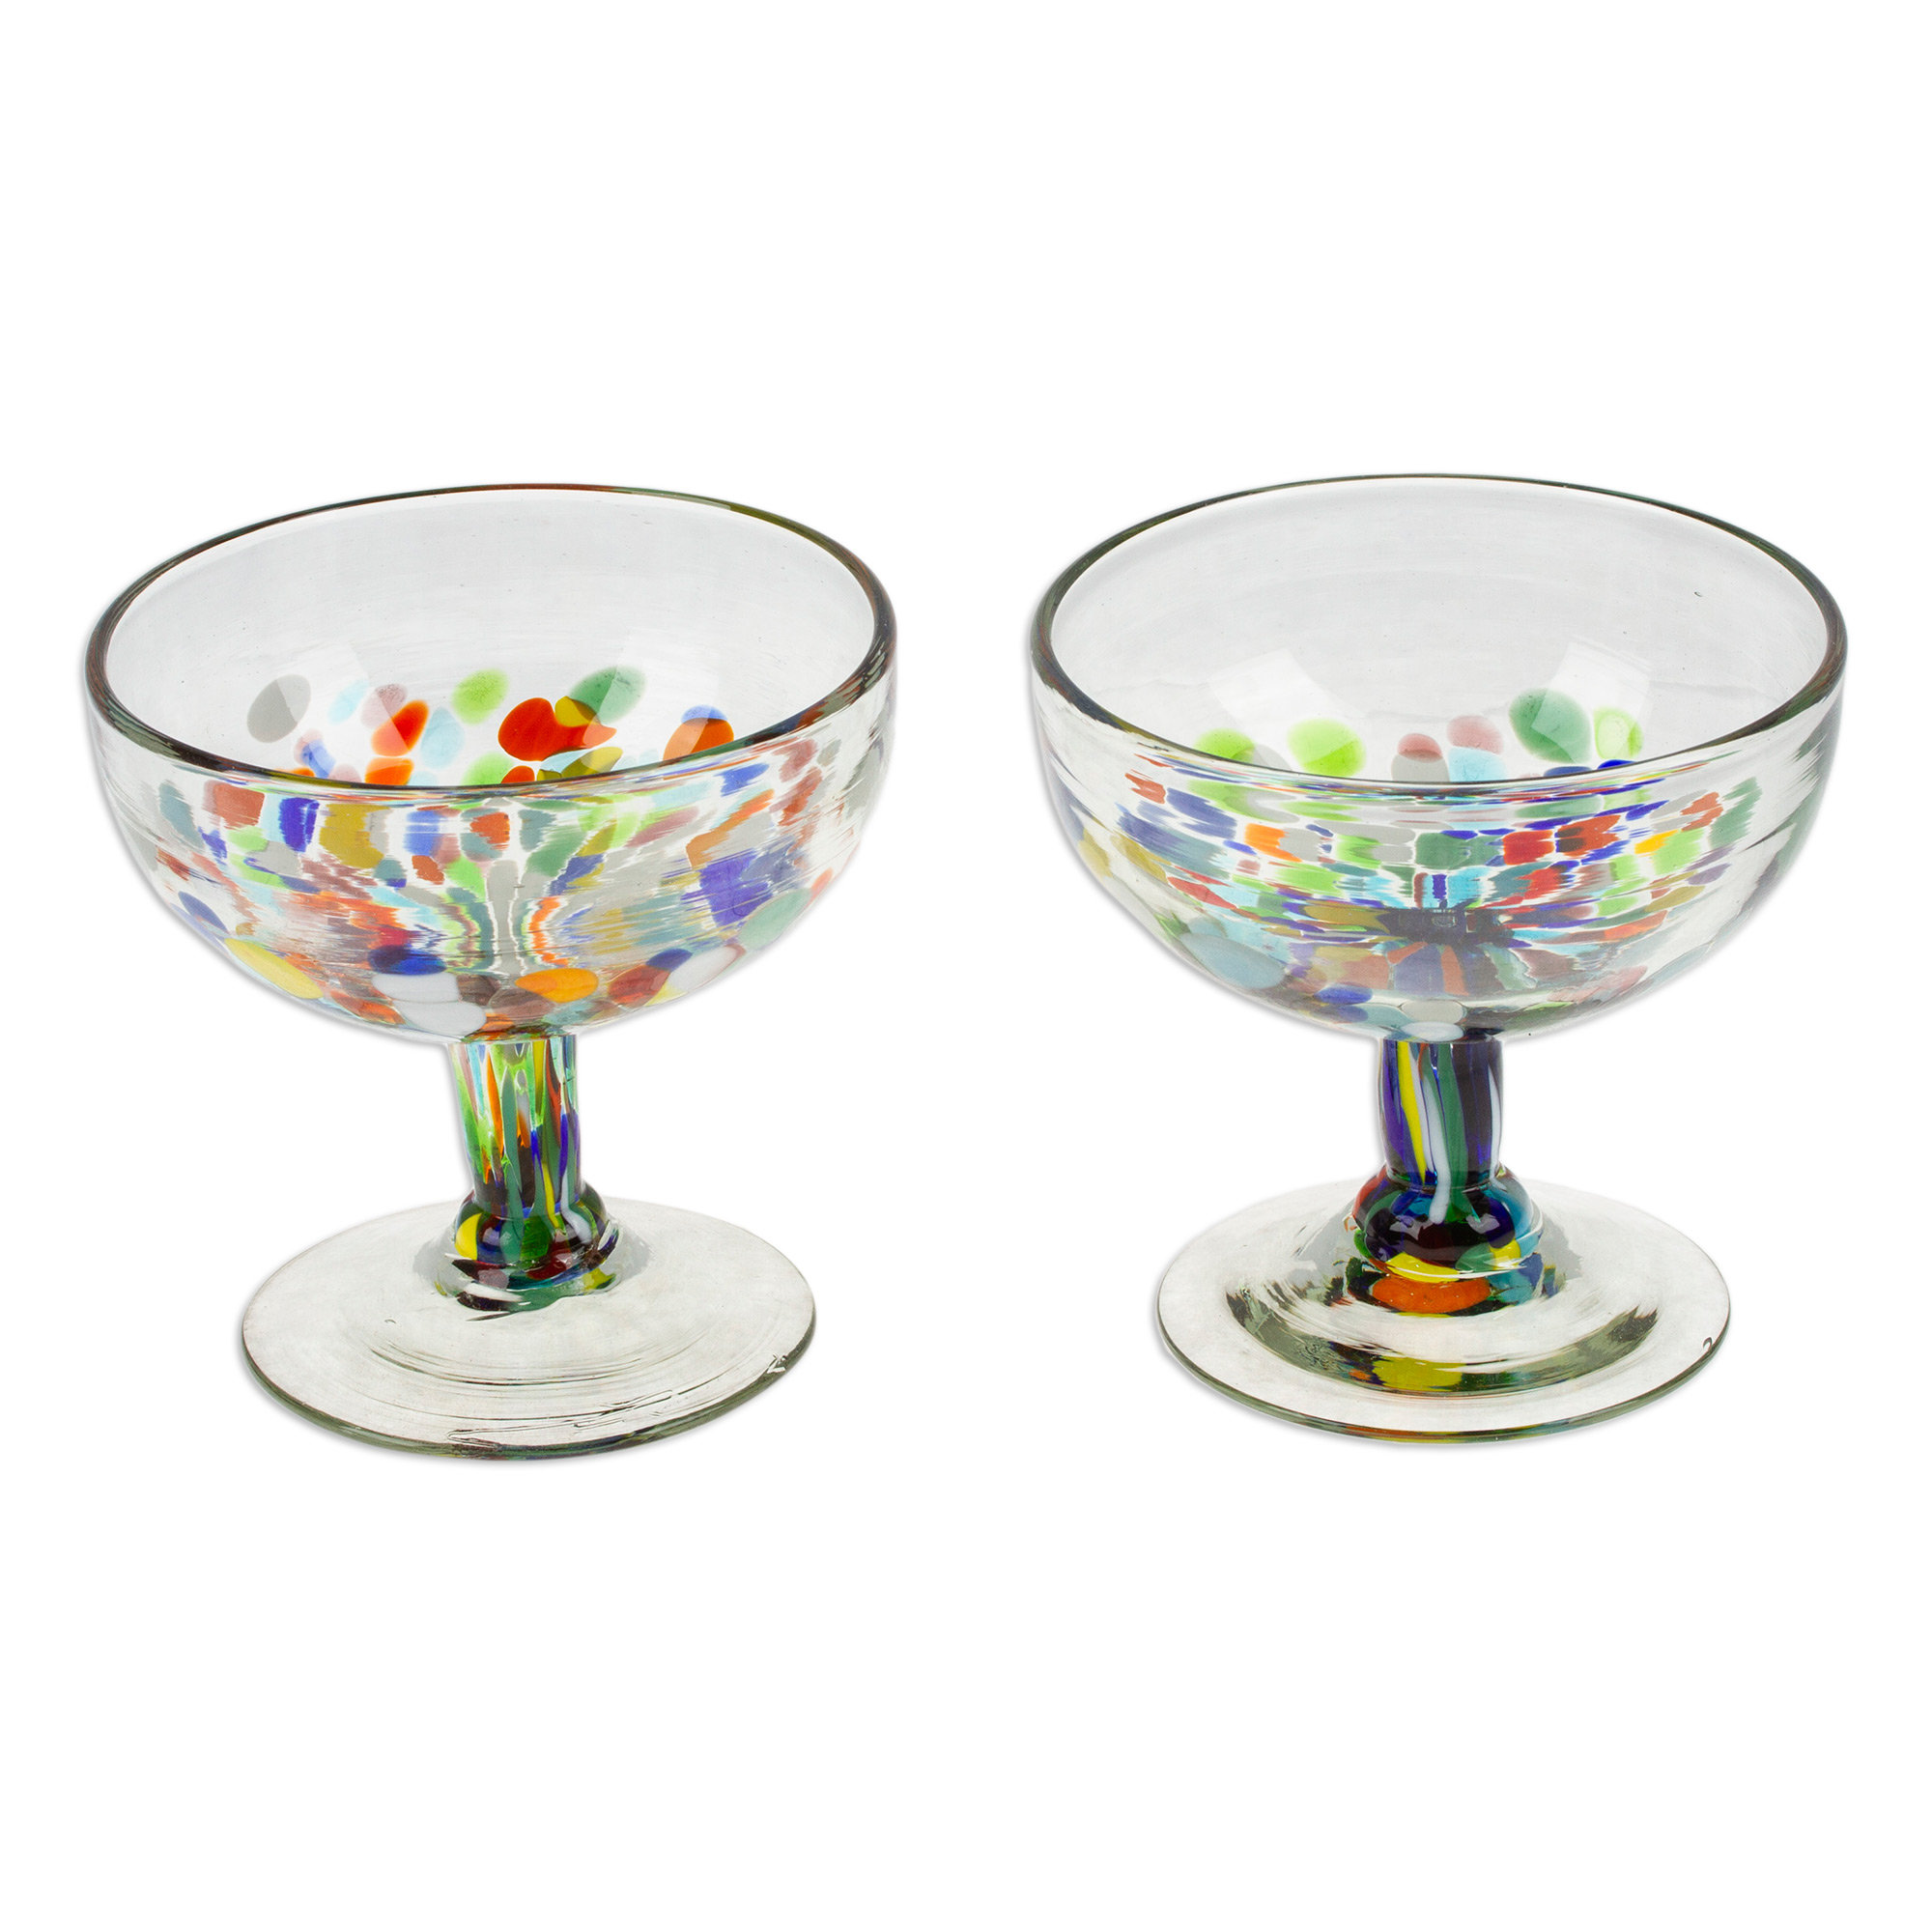 Set of 4 Colorful Wine Glasses Handblown from Recycled Glass - Bright  Confetti